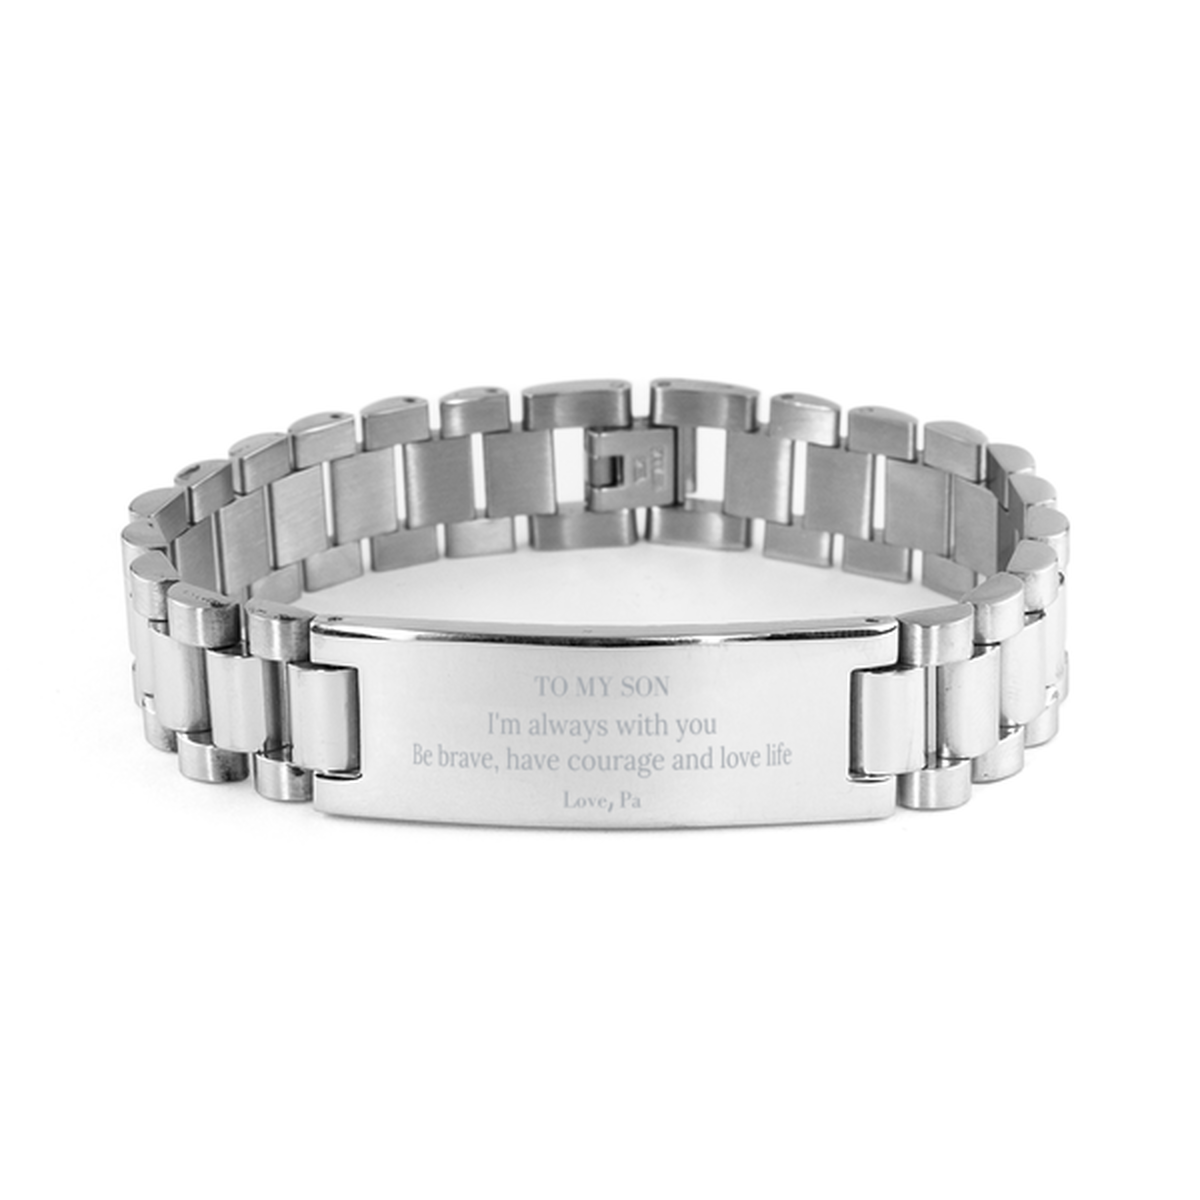 To My Son Gifts from Pa, Unique Ladder Stainless Steel Bracelet Inspirational Christmas Birthday Graduation Gifts for Son I'm always with you. Be brave, have courage and love life. Love, Pa